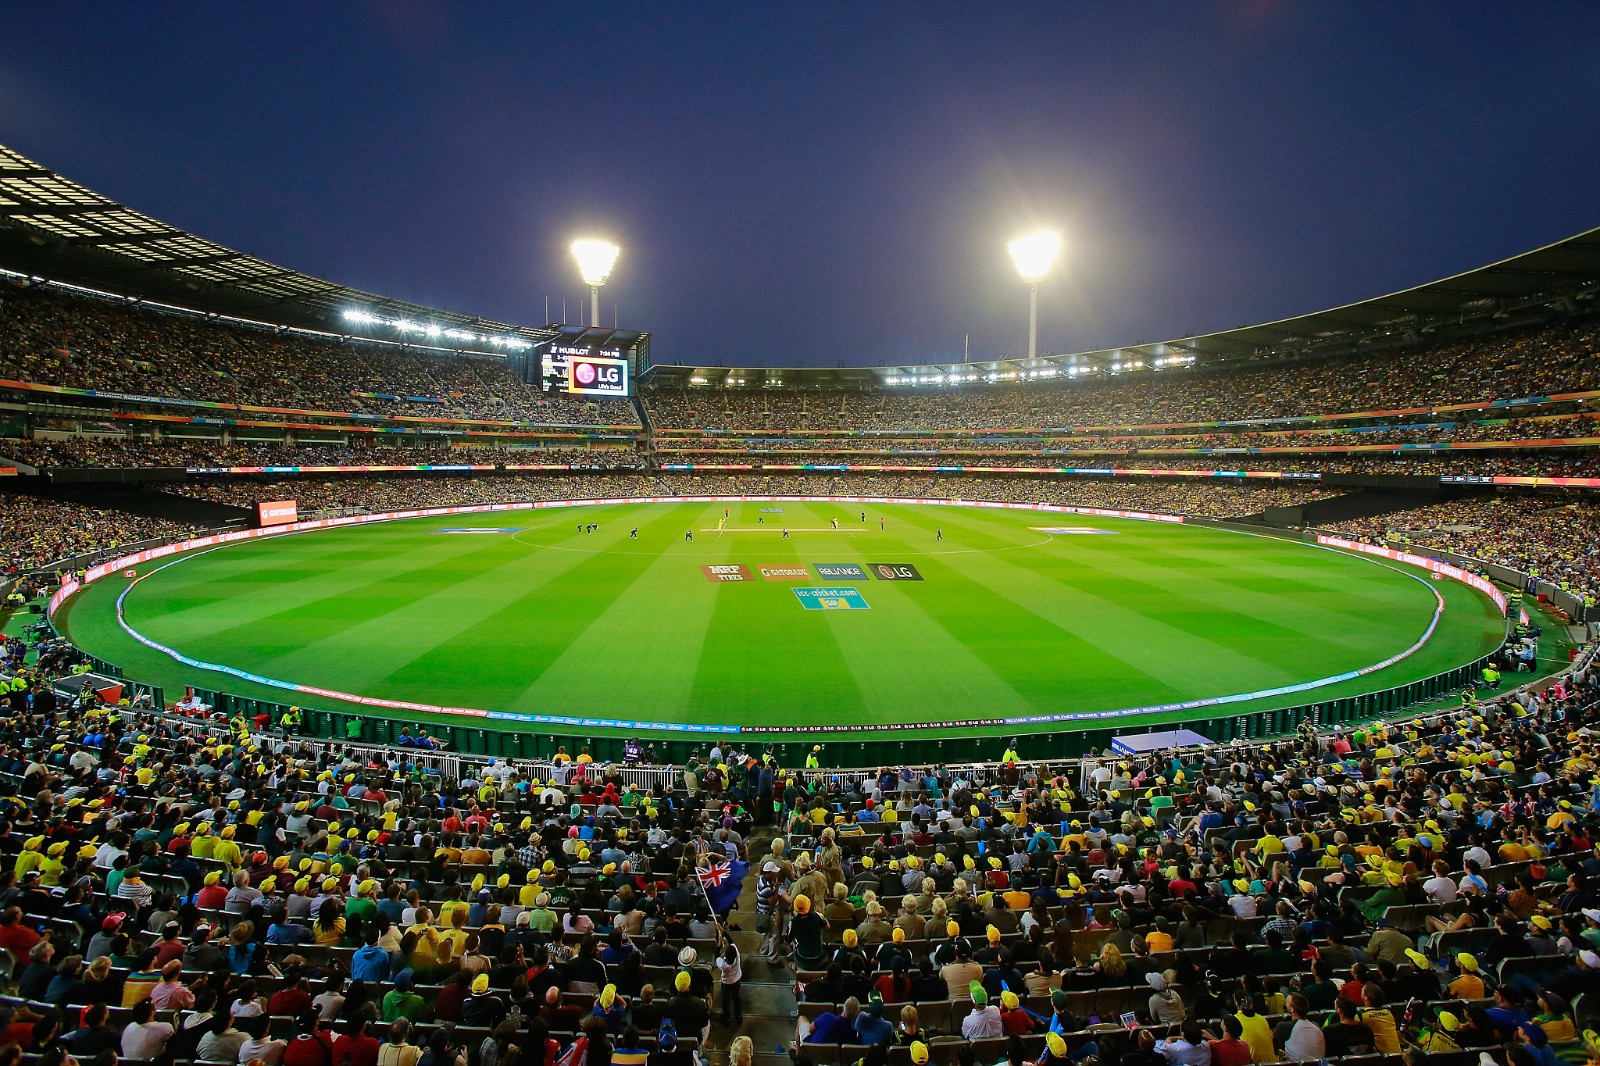 A general view of the crowd during the 2015 ICC Cricket World Cup final between Australia and New Zealand at the Melbourne Cricket Ground on March 29, 2015, in Melbourne, Australia. /CFP